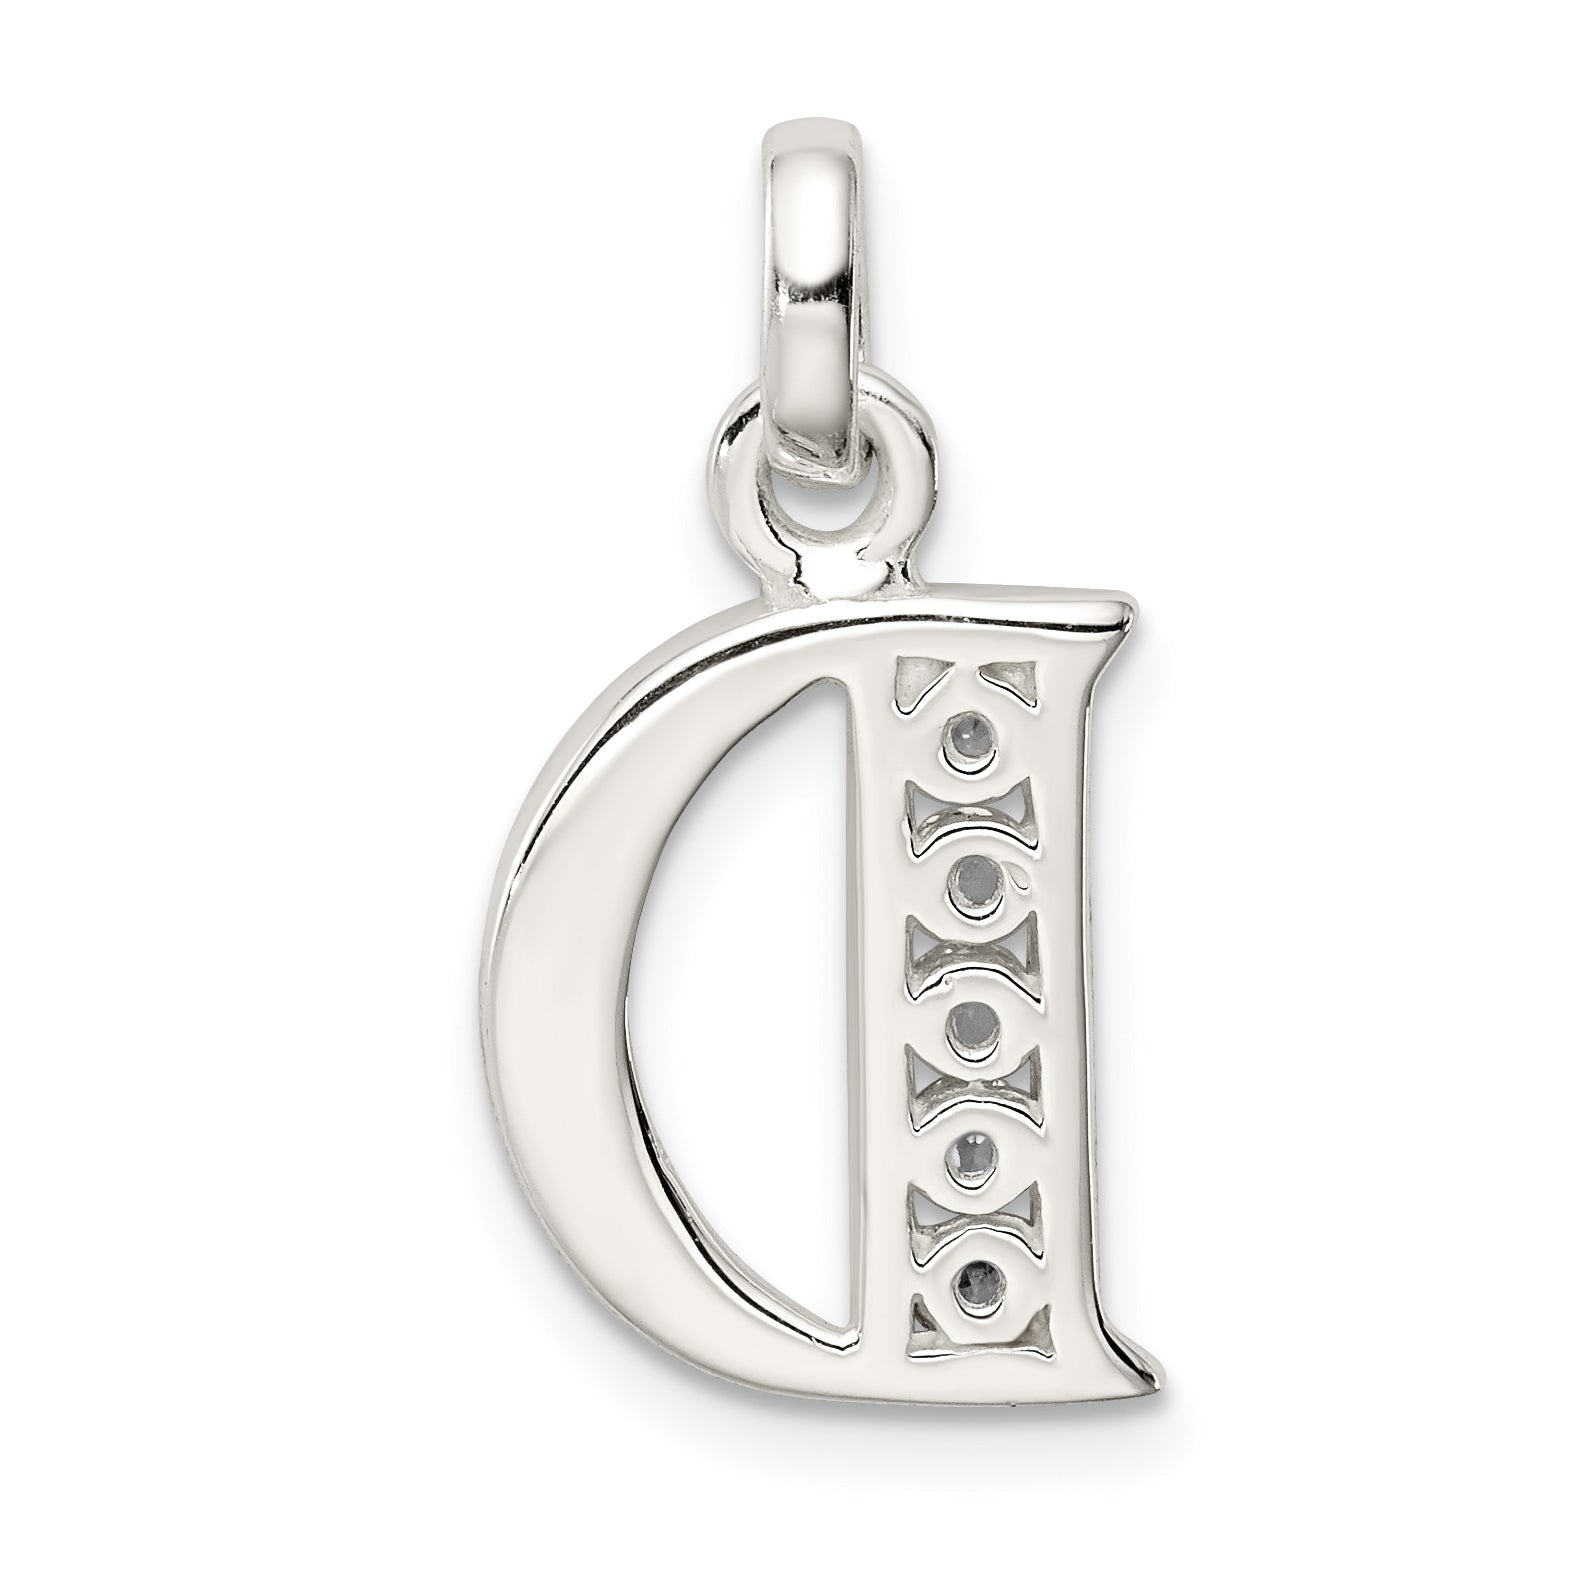 Sterling Silver White CZ Letter D Initial Pendant